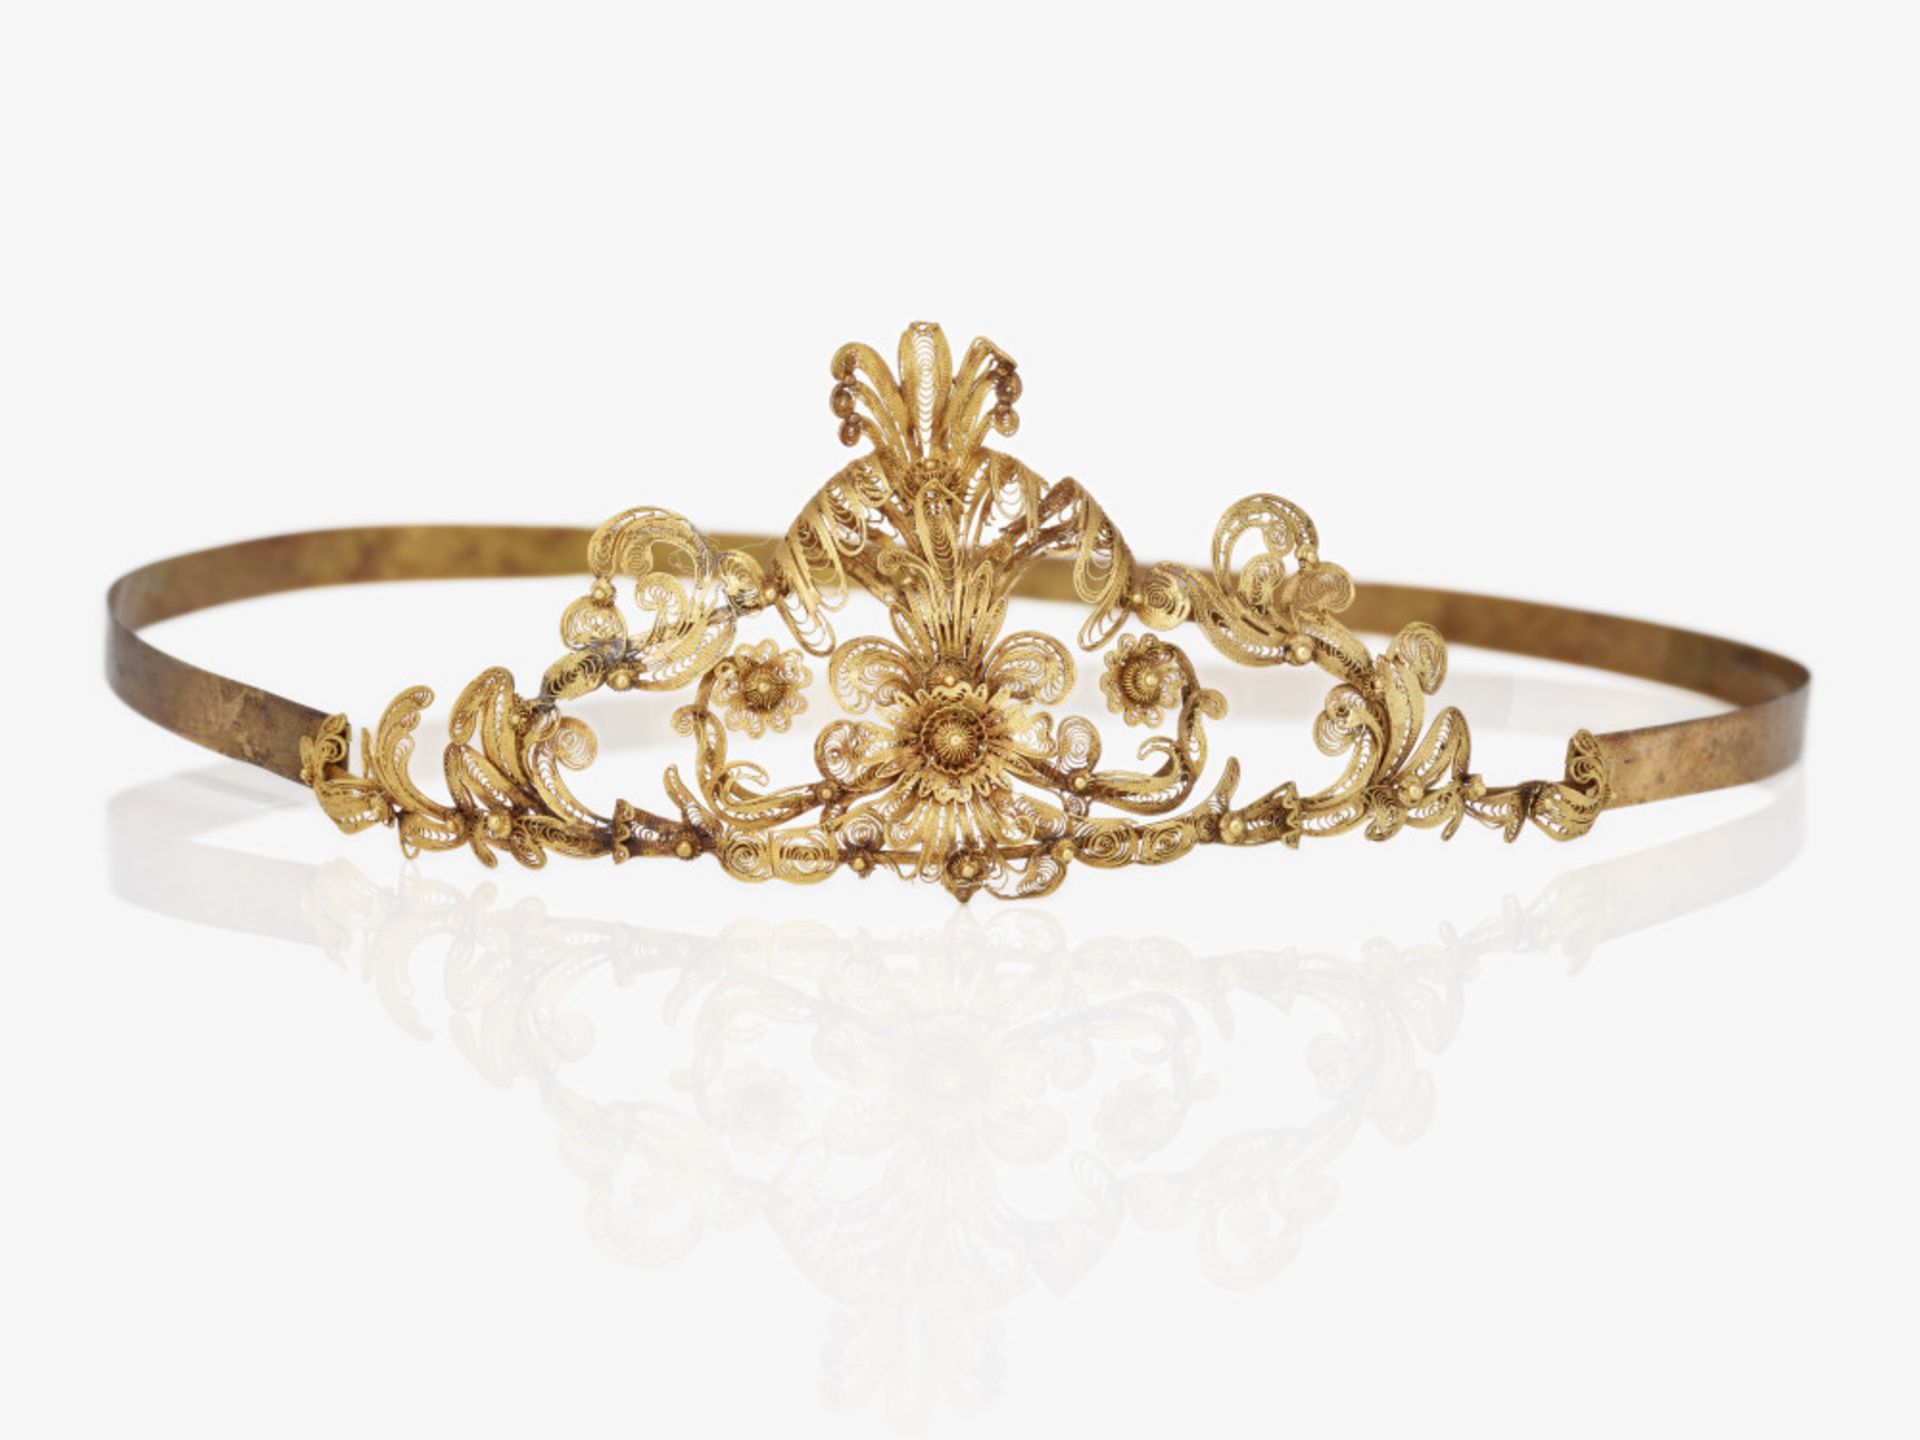 A rare tiara made of gold filigree (cannetille technique) - Probably Germany, circa 1810-1820 - Image 2 of 3